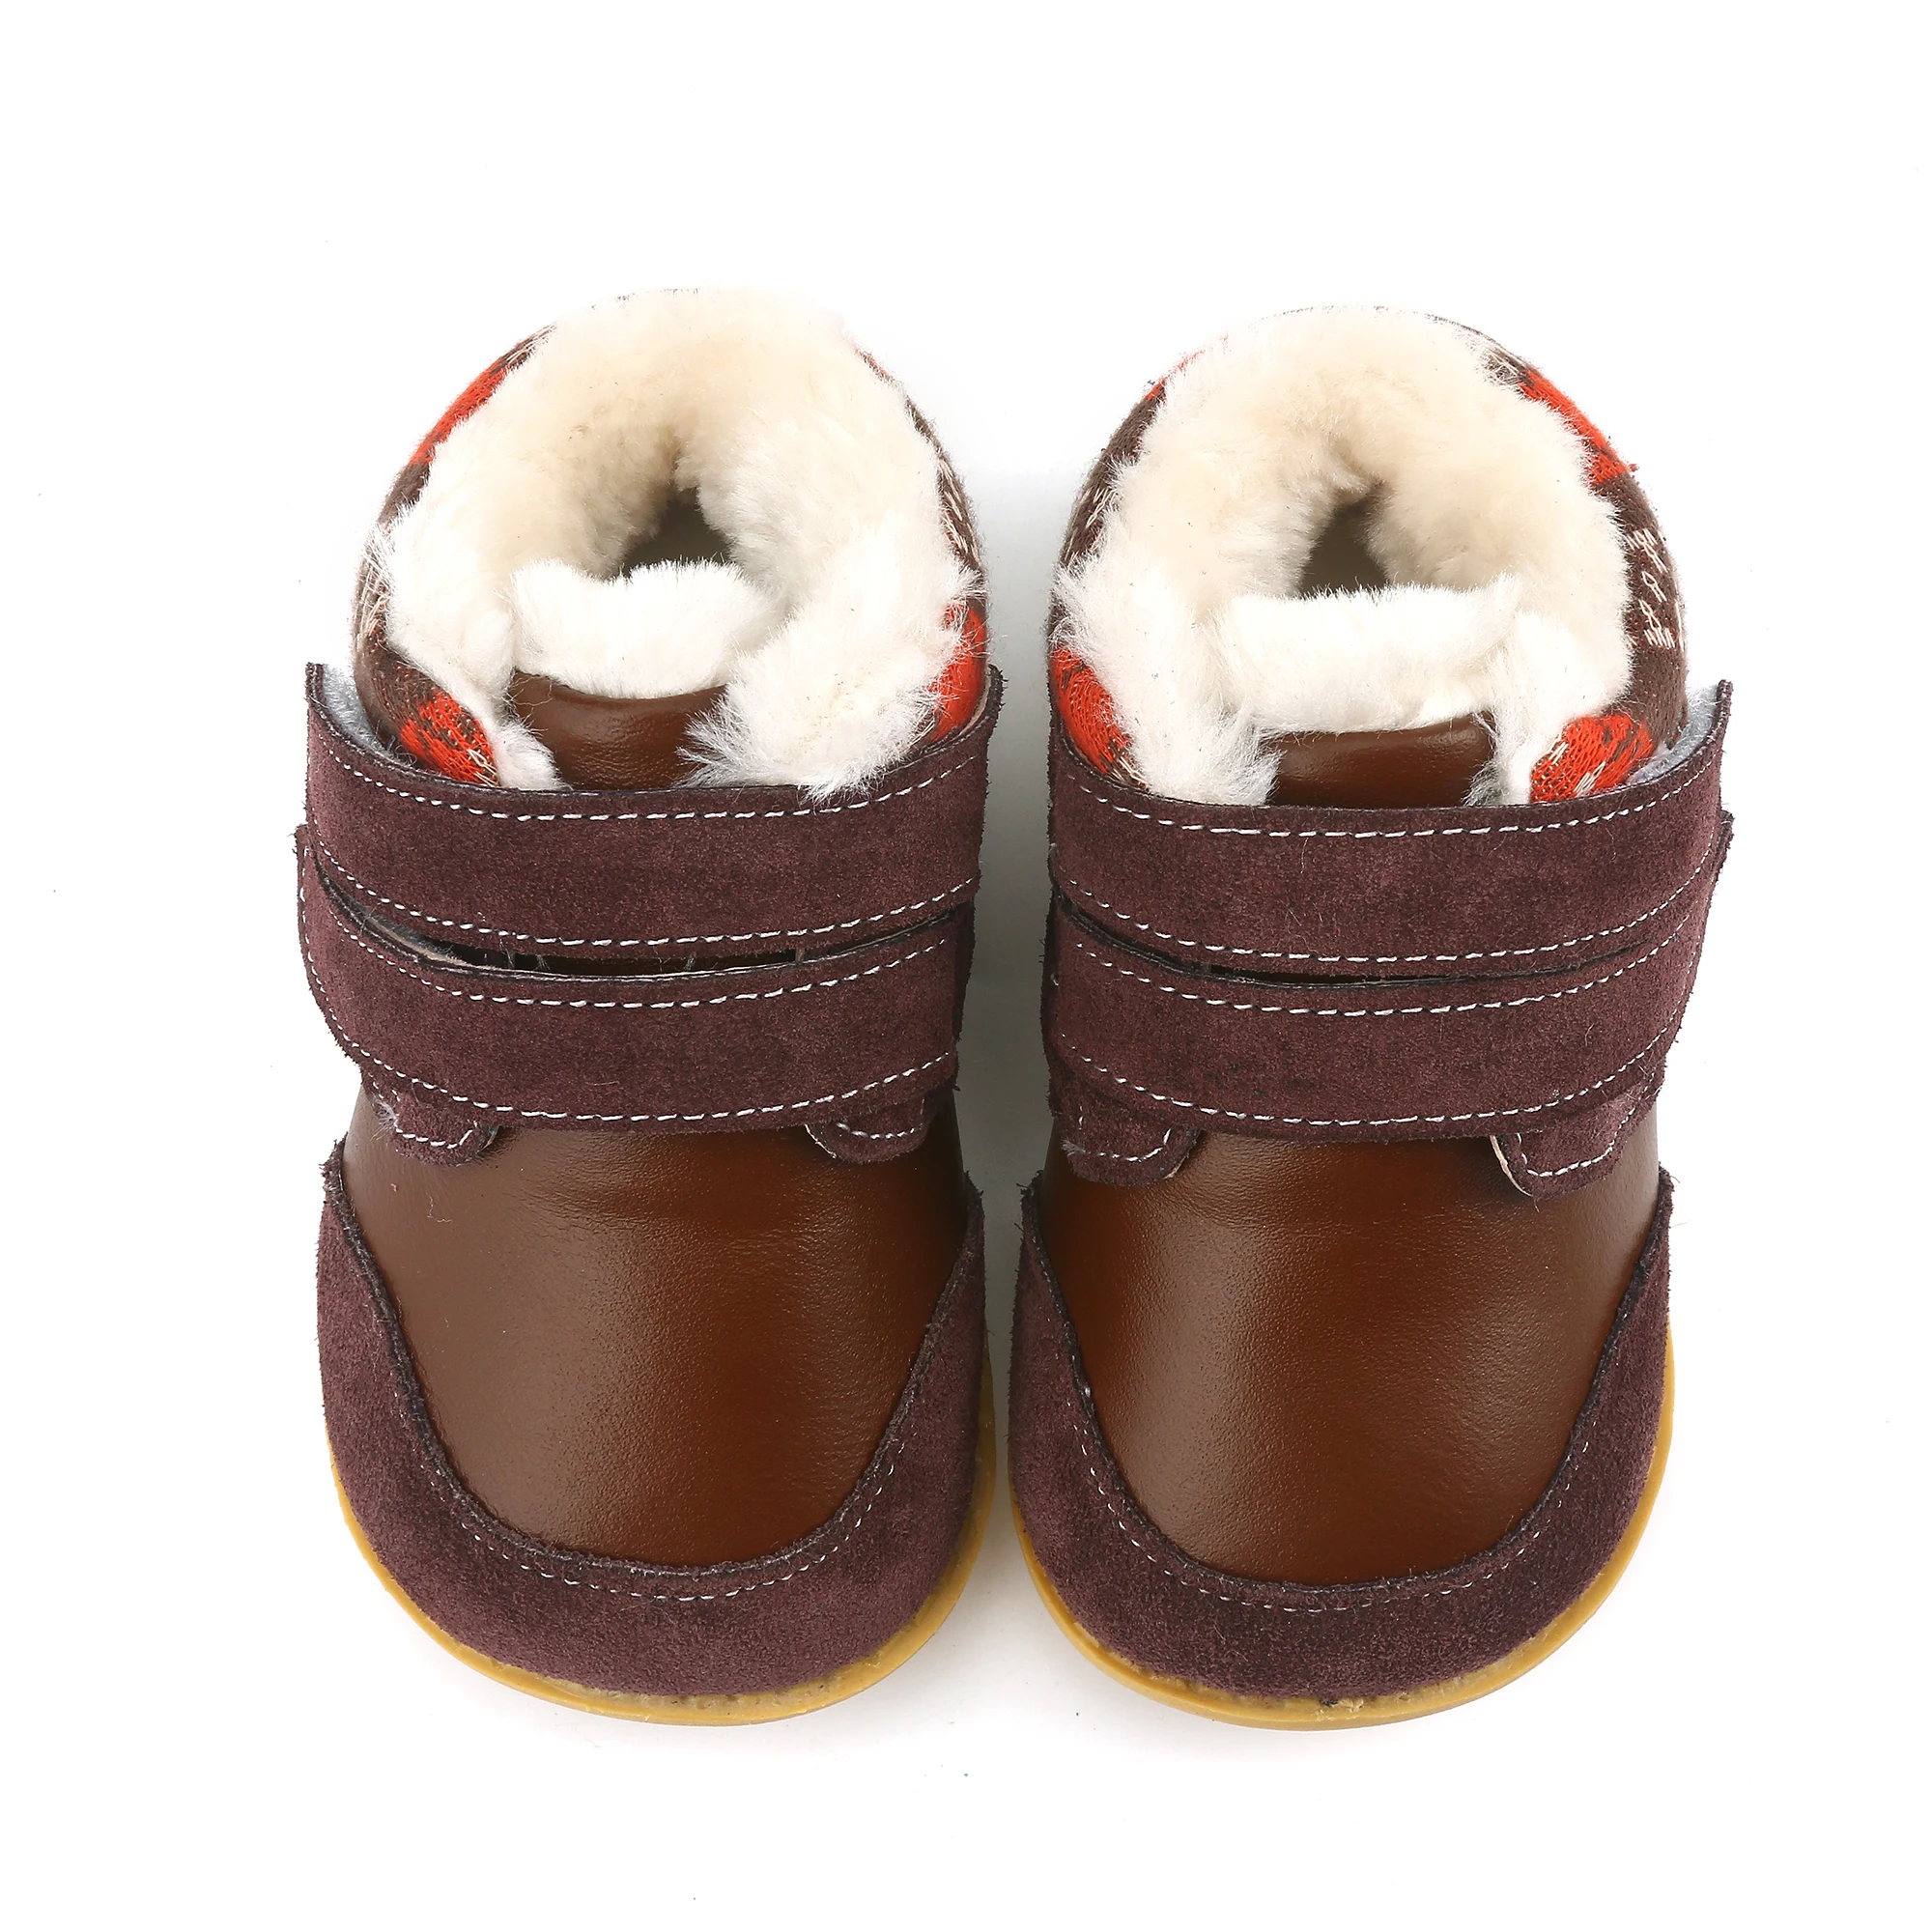 

TipsieToes manufacturer stock low price real leather super soft stylish western flat fur boots for little boy girl kids teenage, Many color